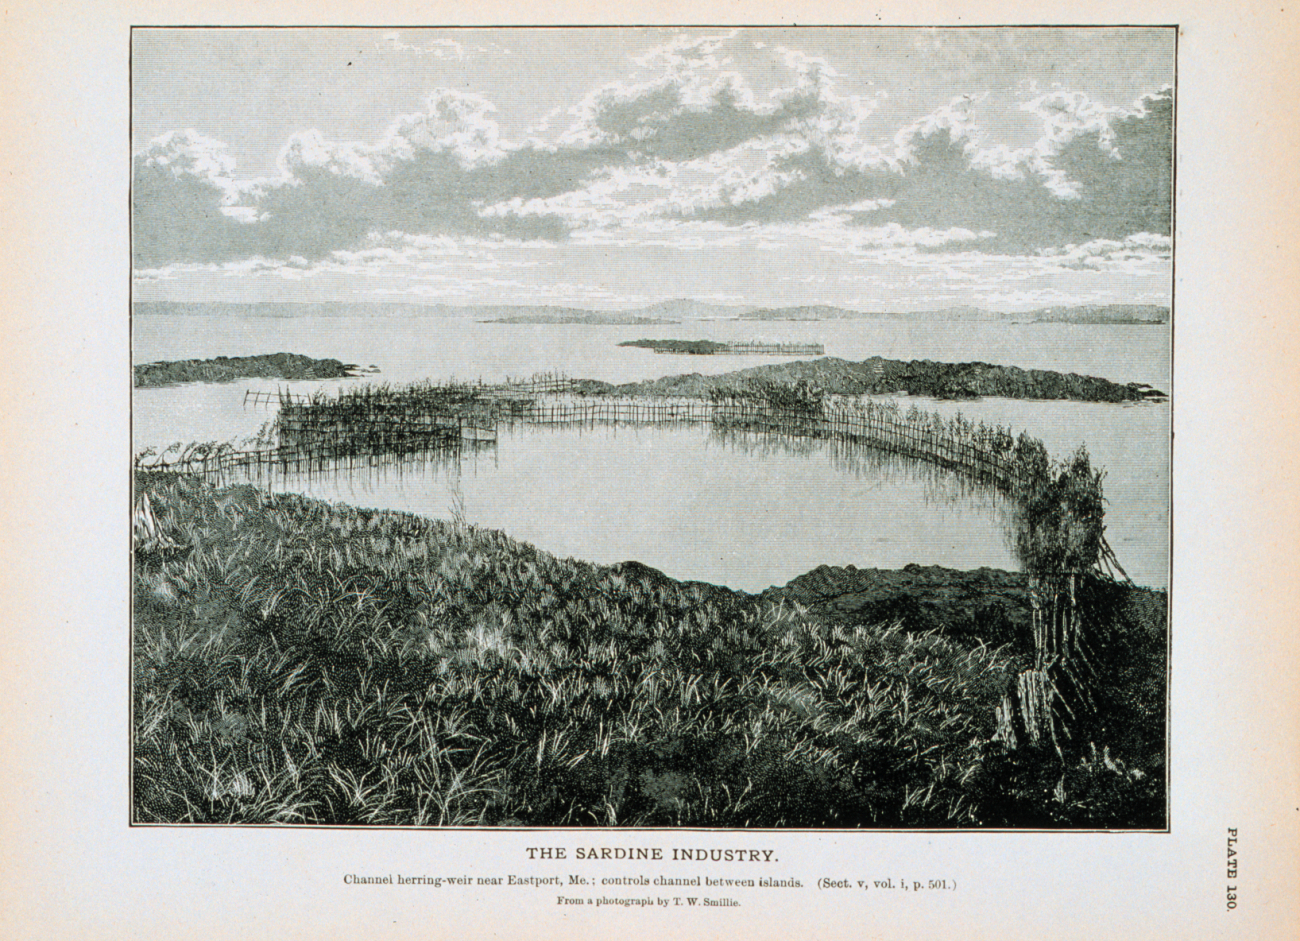 Channel herring weir near Eastport, Maine; controls channel between islandsFrom a photograph by T